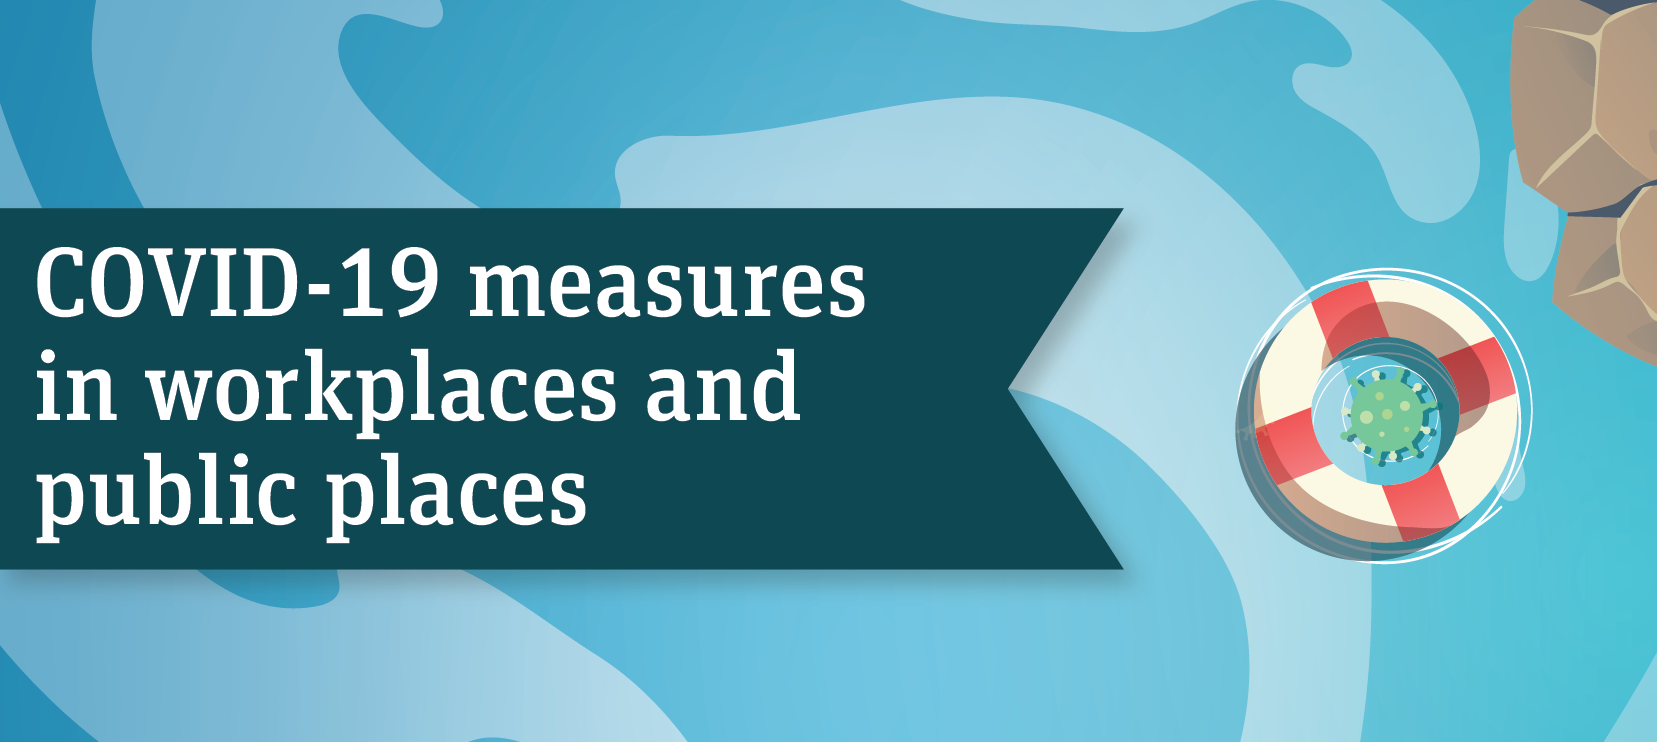 COVID-19 measures in workplaces and public places